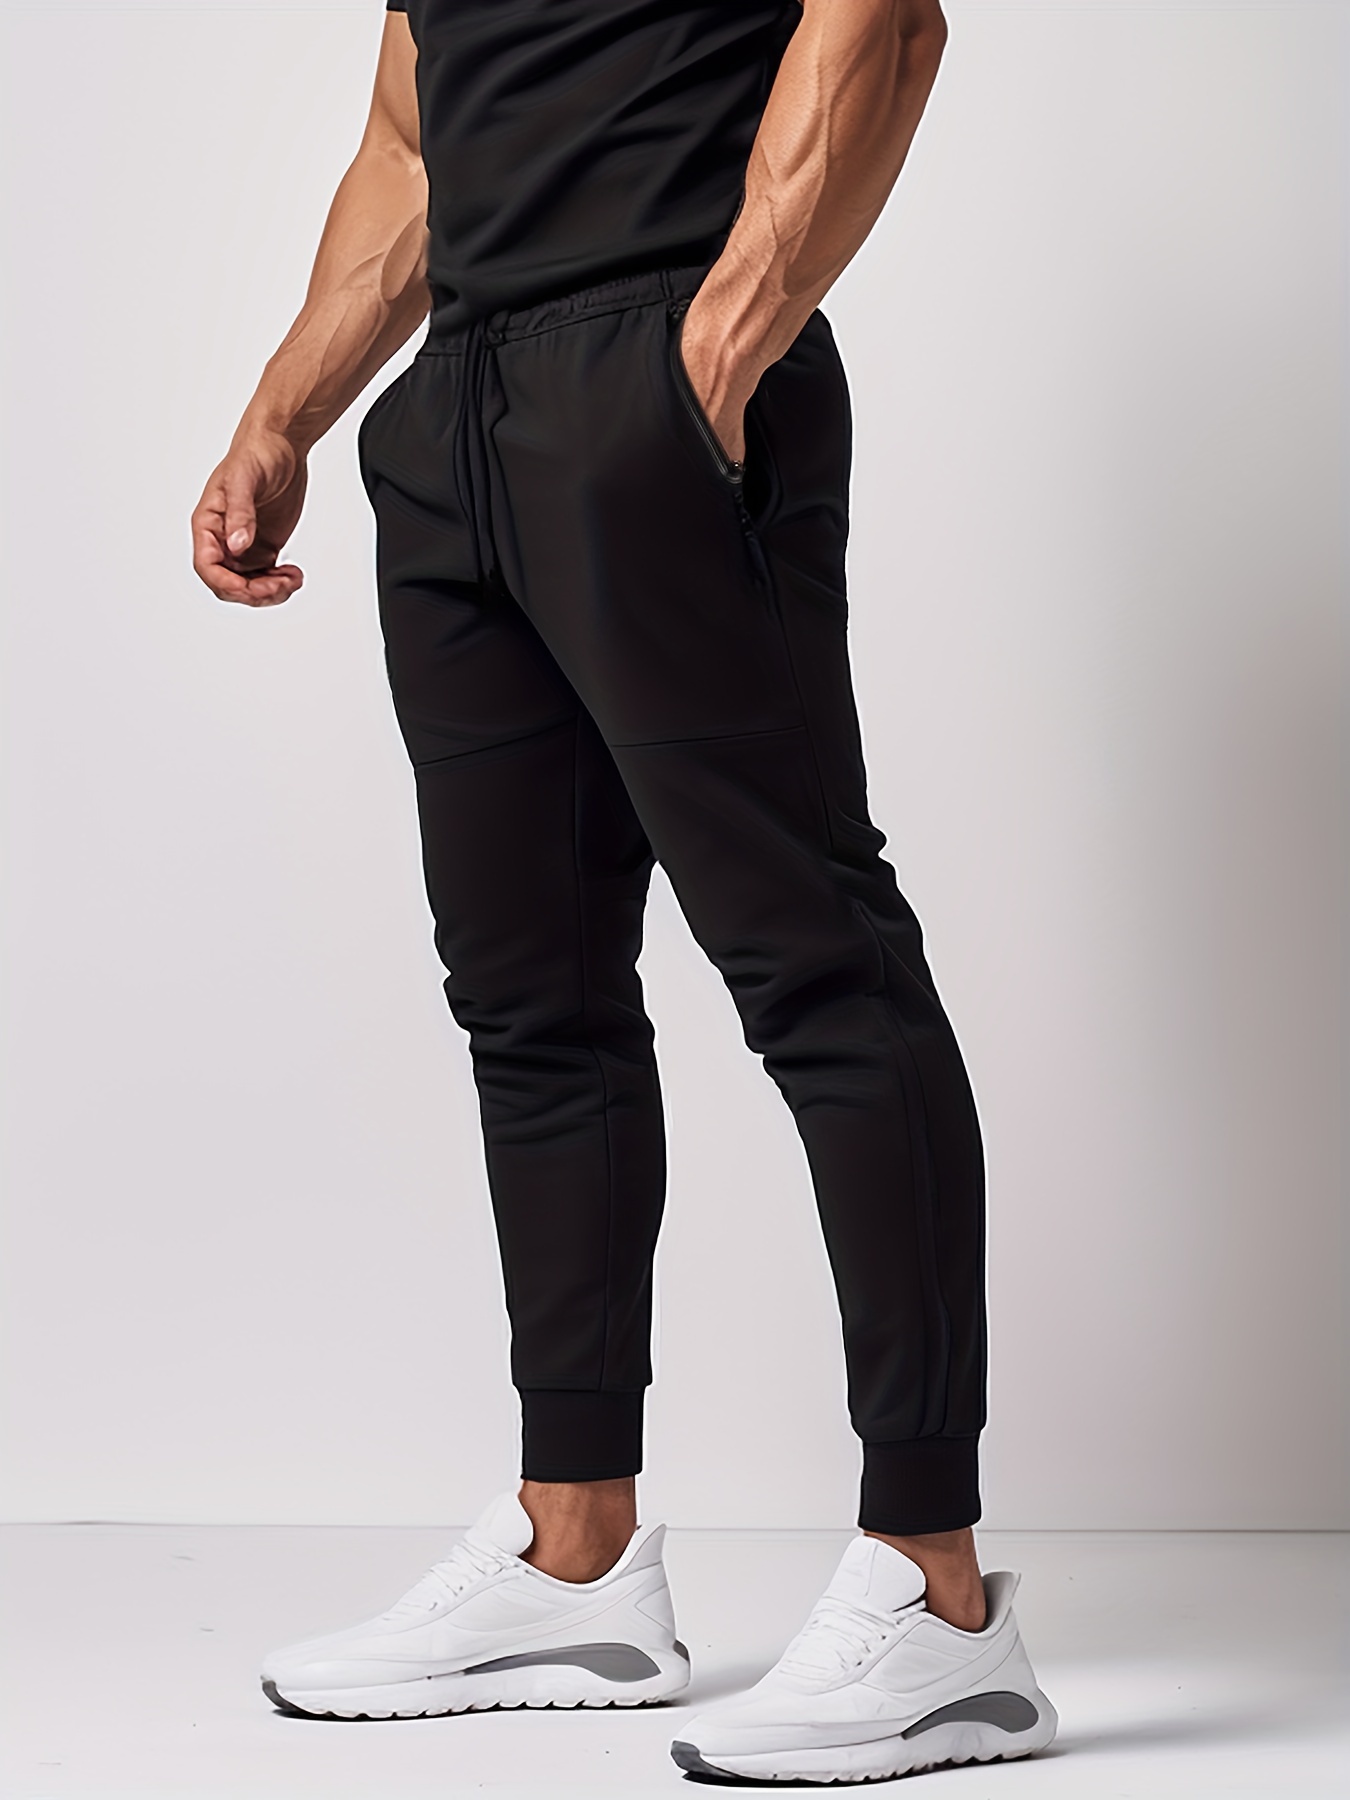 Nike Quick Dry Casual Sports Pants/Trousers/Joggers Autumn Black